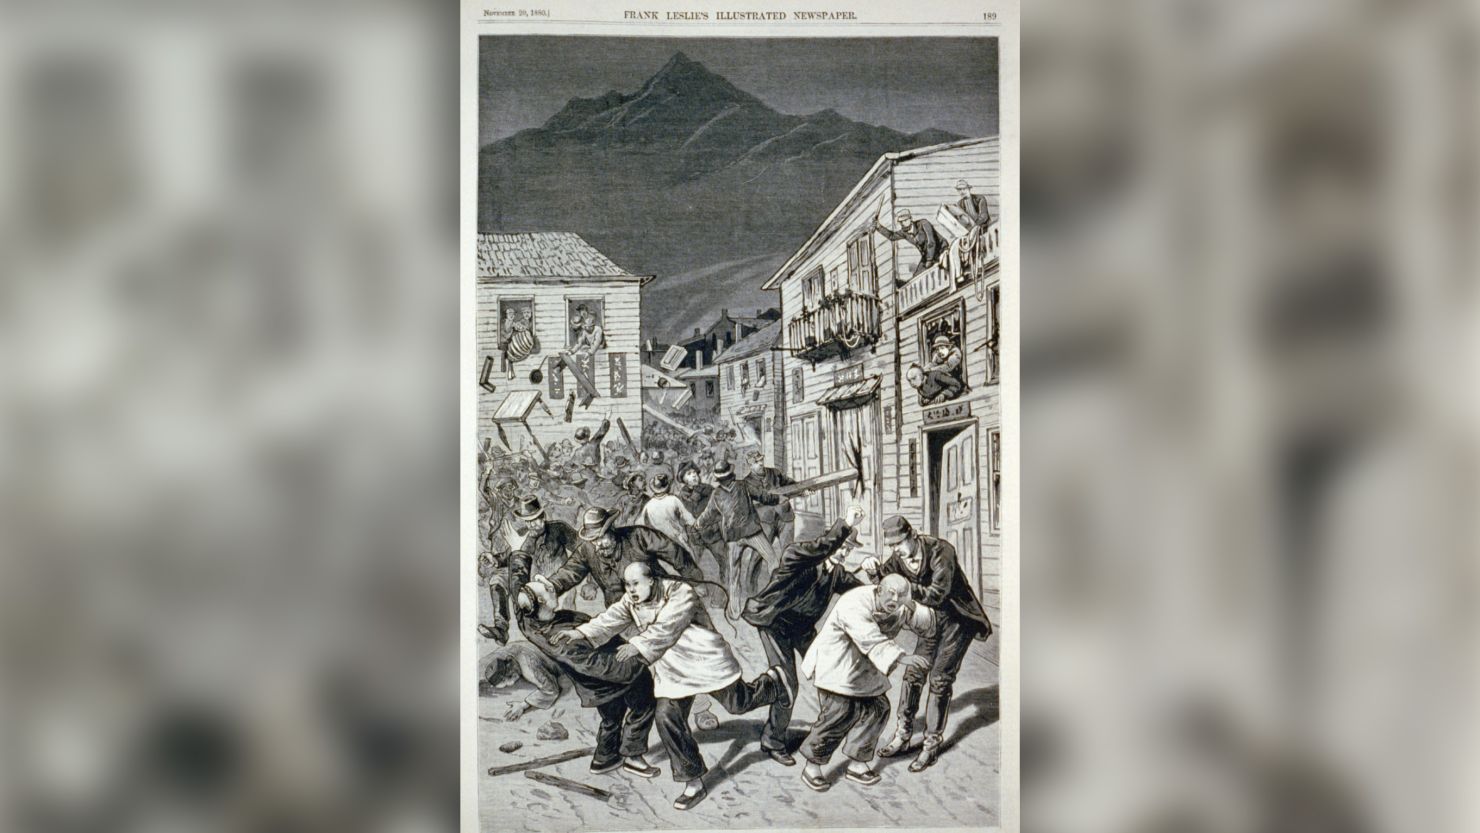 The anti-Chinese riot of October 31, 1880, in Denver is depicted in this wood engraving first published in November 1880 in Frank Leslie's Illustrated Newspaper. (Library of Congress)